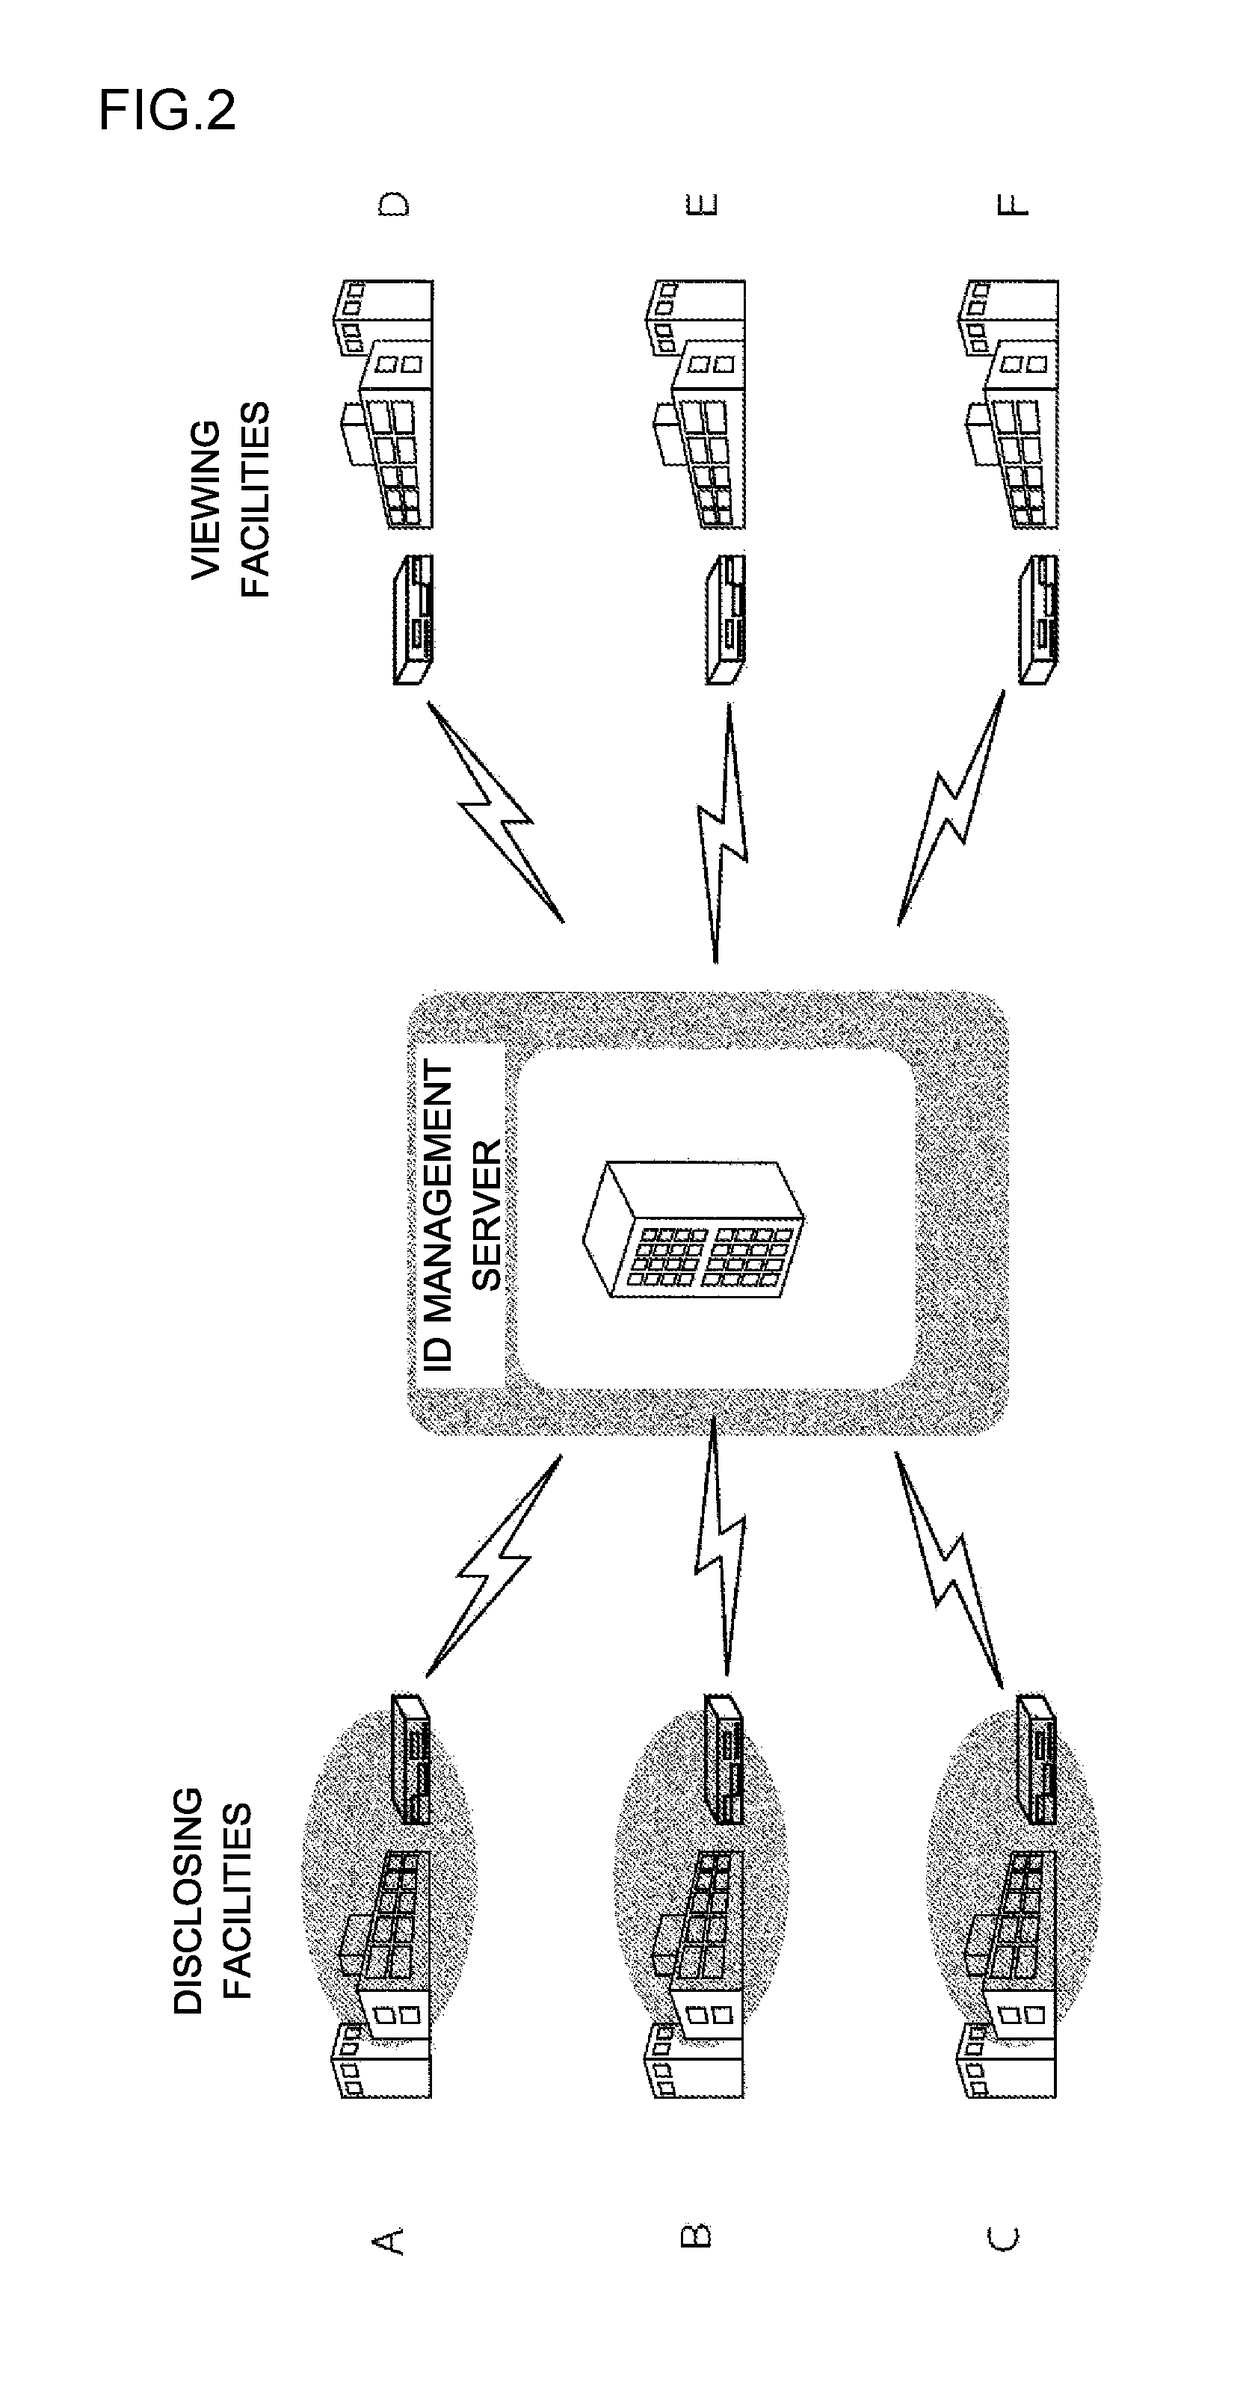 Integrated multi-facility electronic medical record system